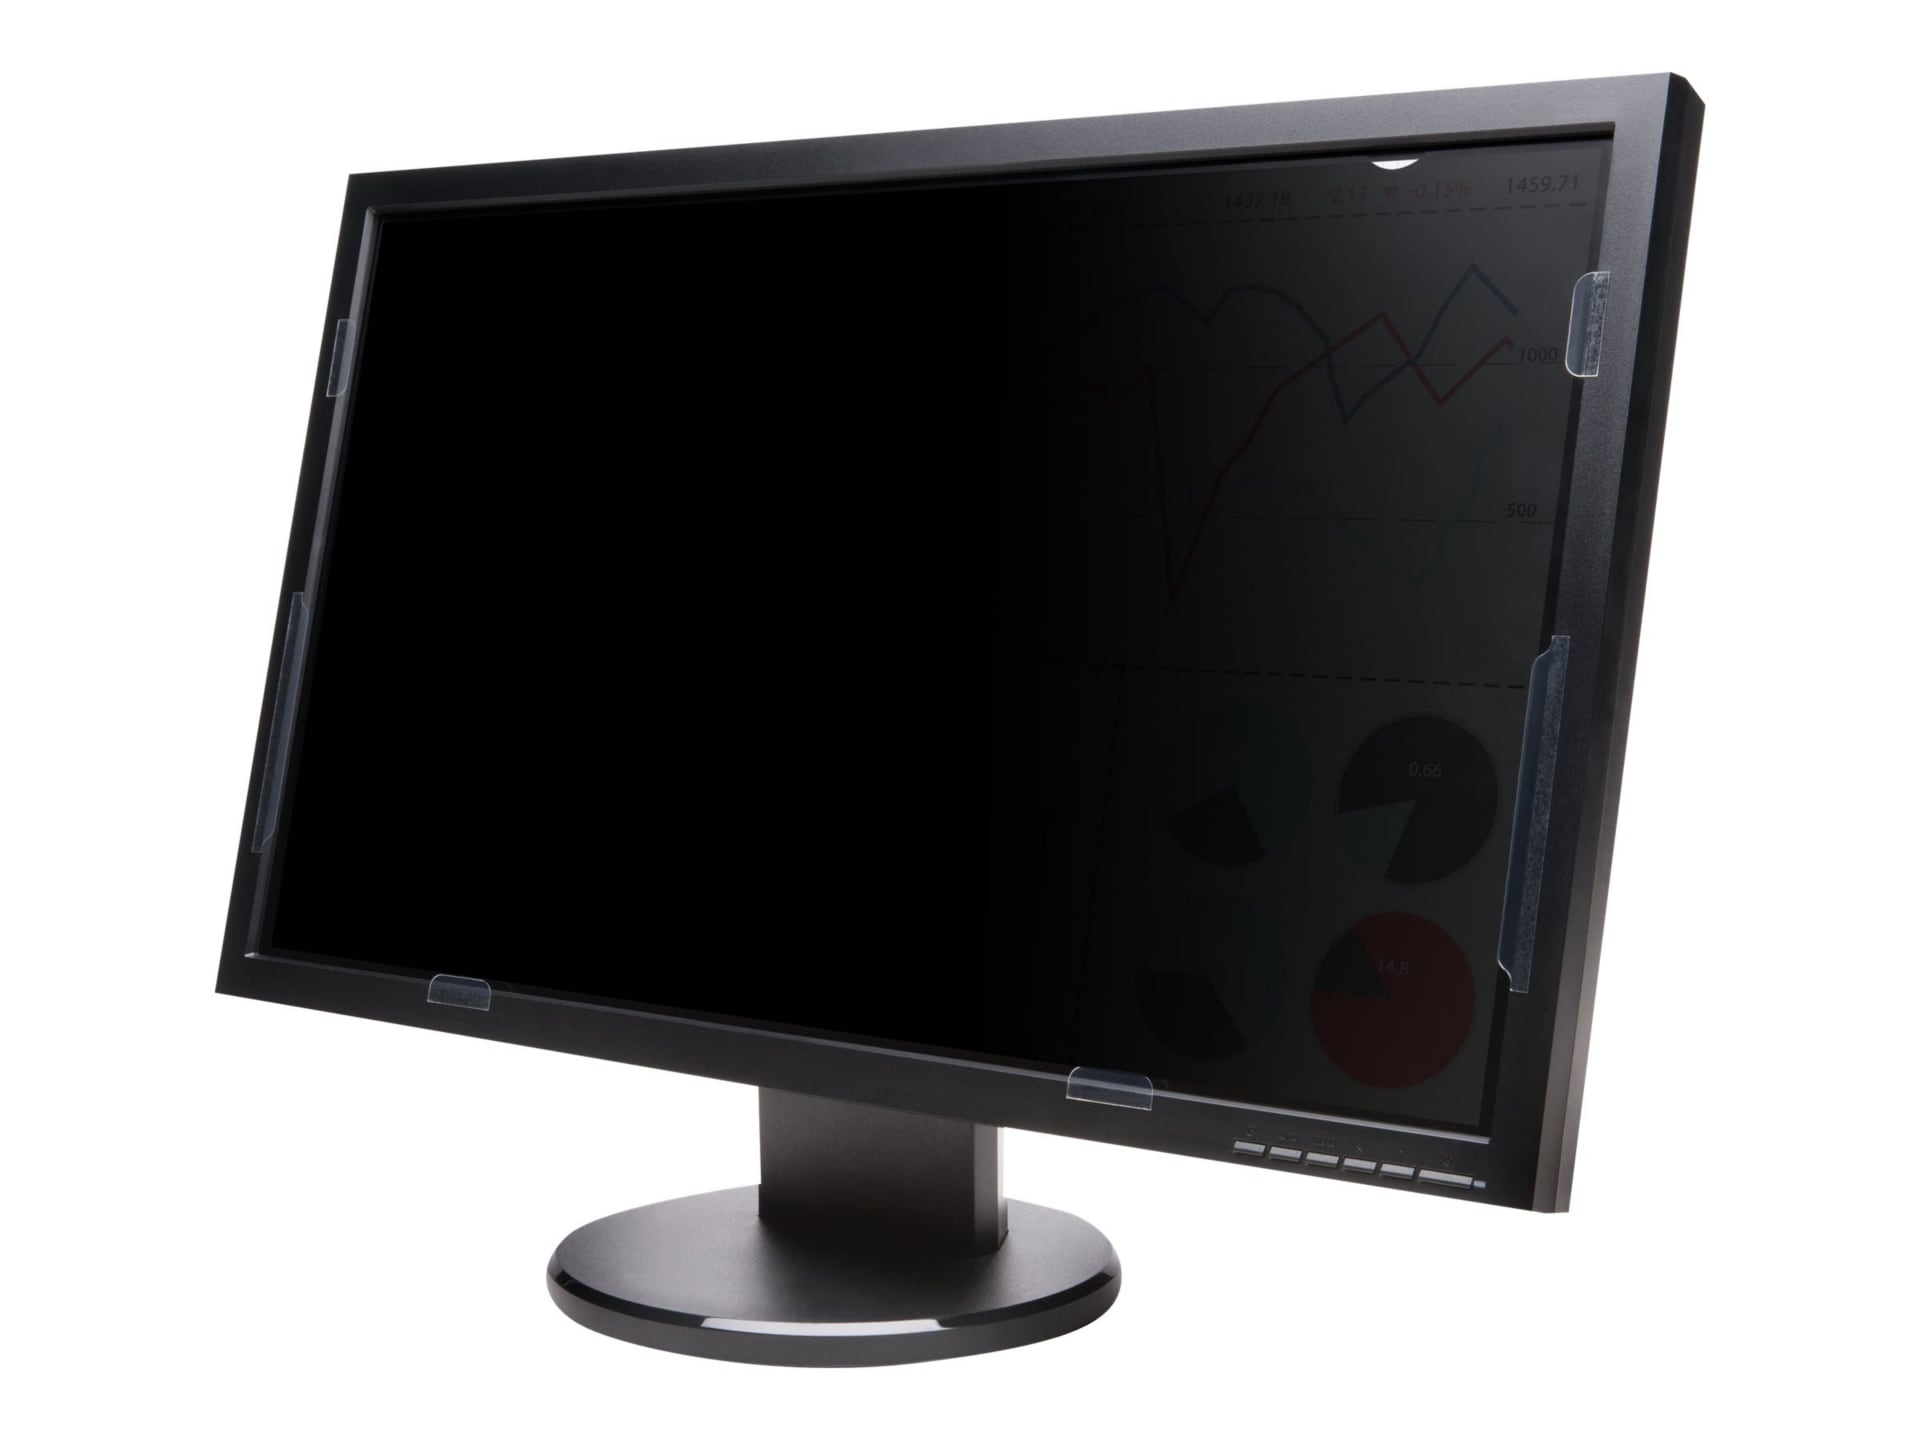 Kensington FP240W Privacy Screen for 24-inch Widescreen Monitors - 16:10 - display privacy filter - 24" wide